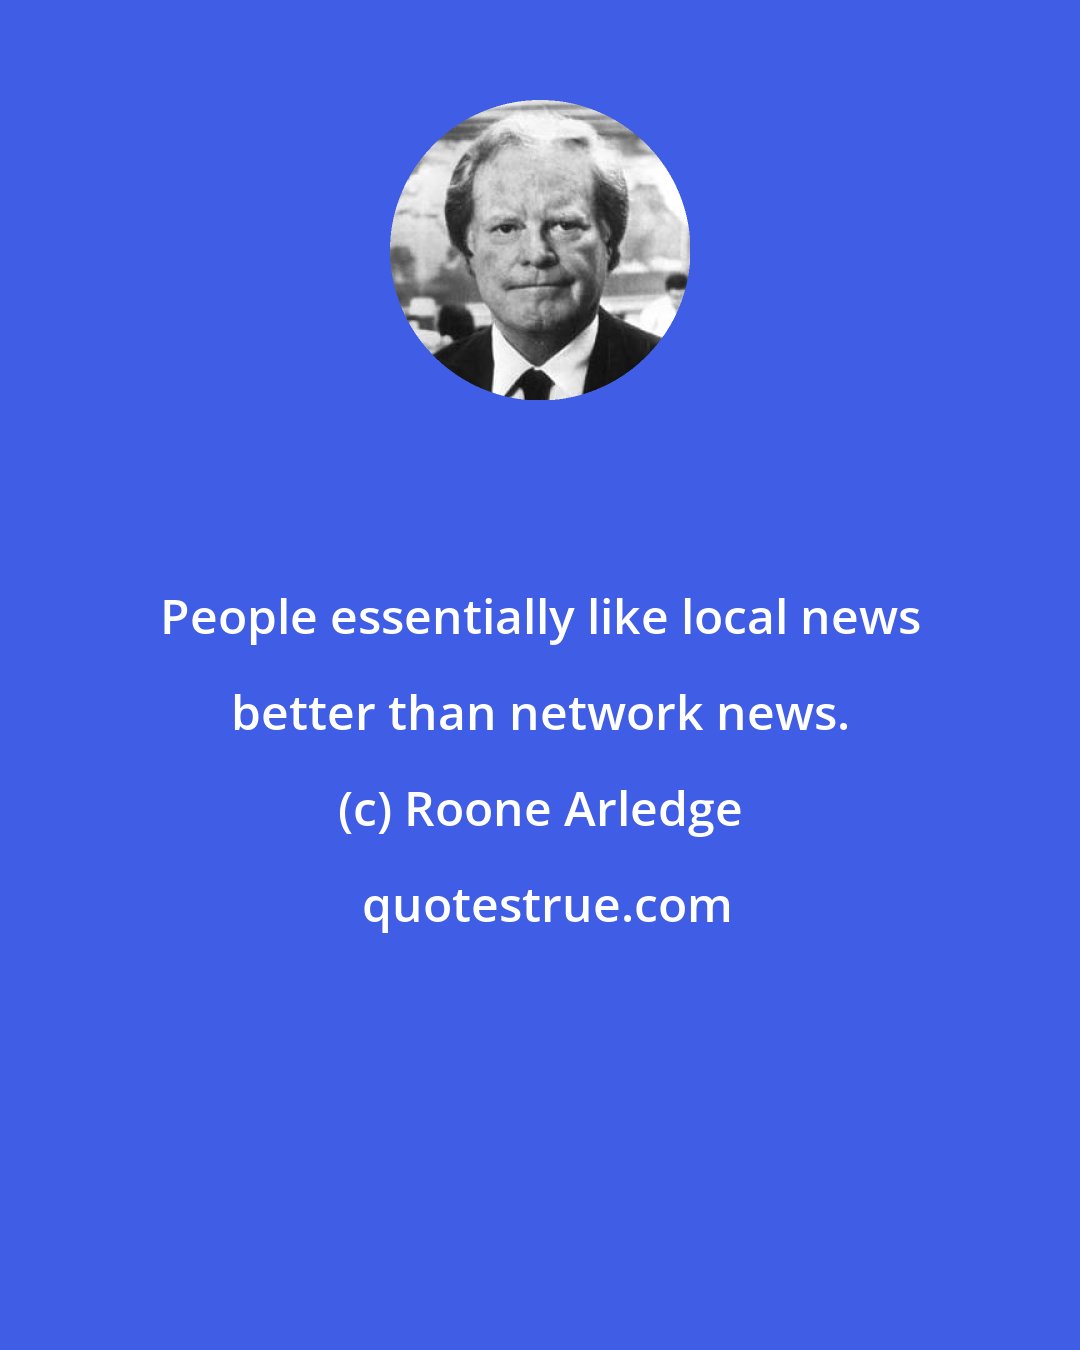 Roone Arledge: People essentially like local news better than network news.